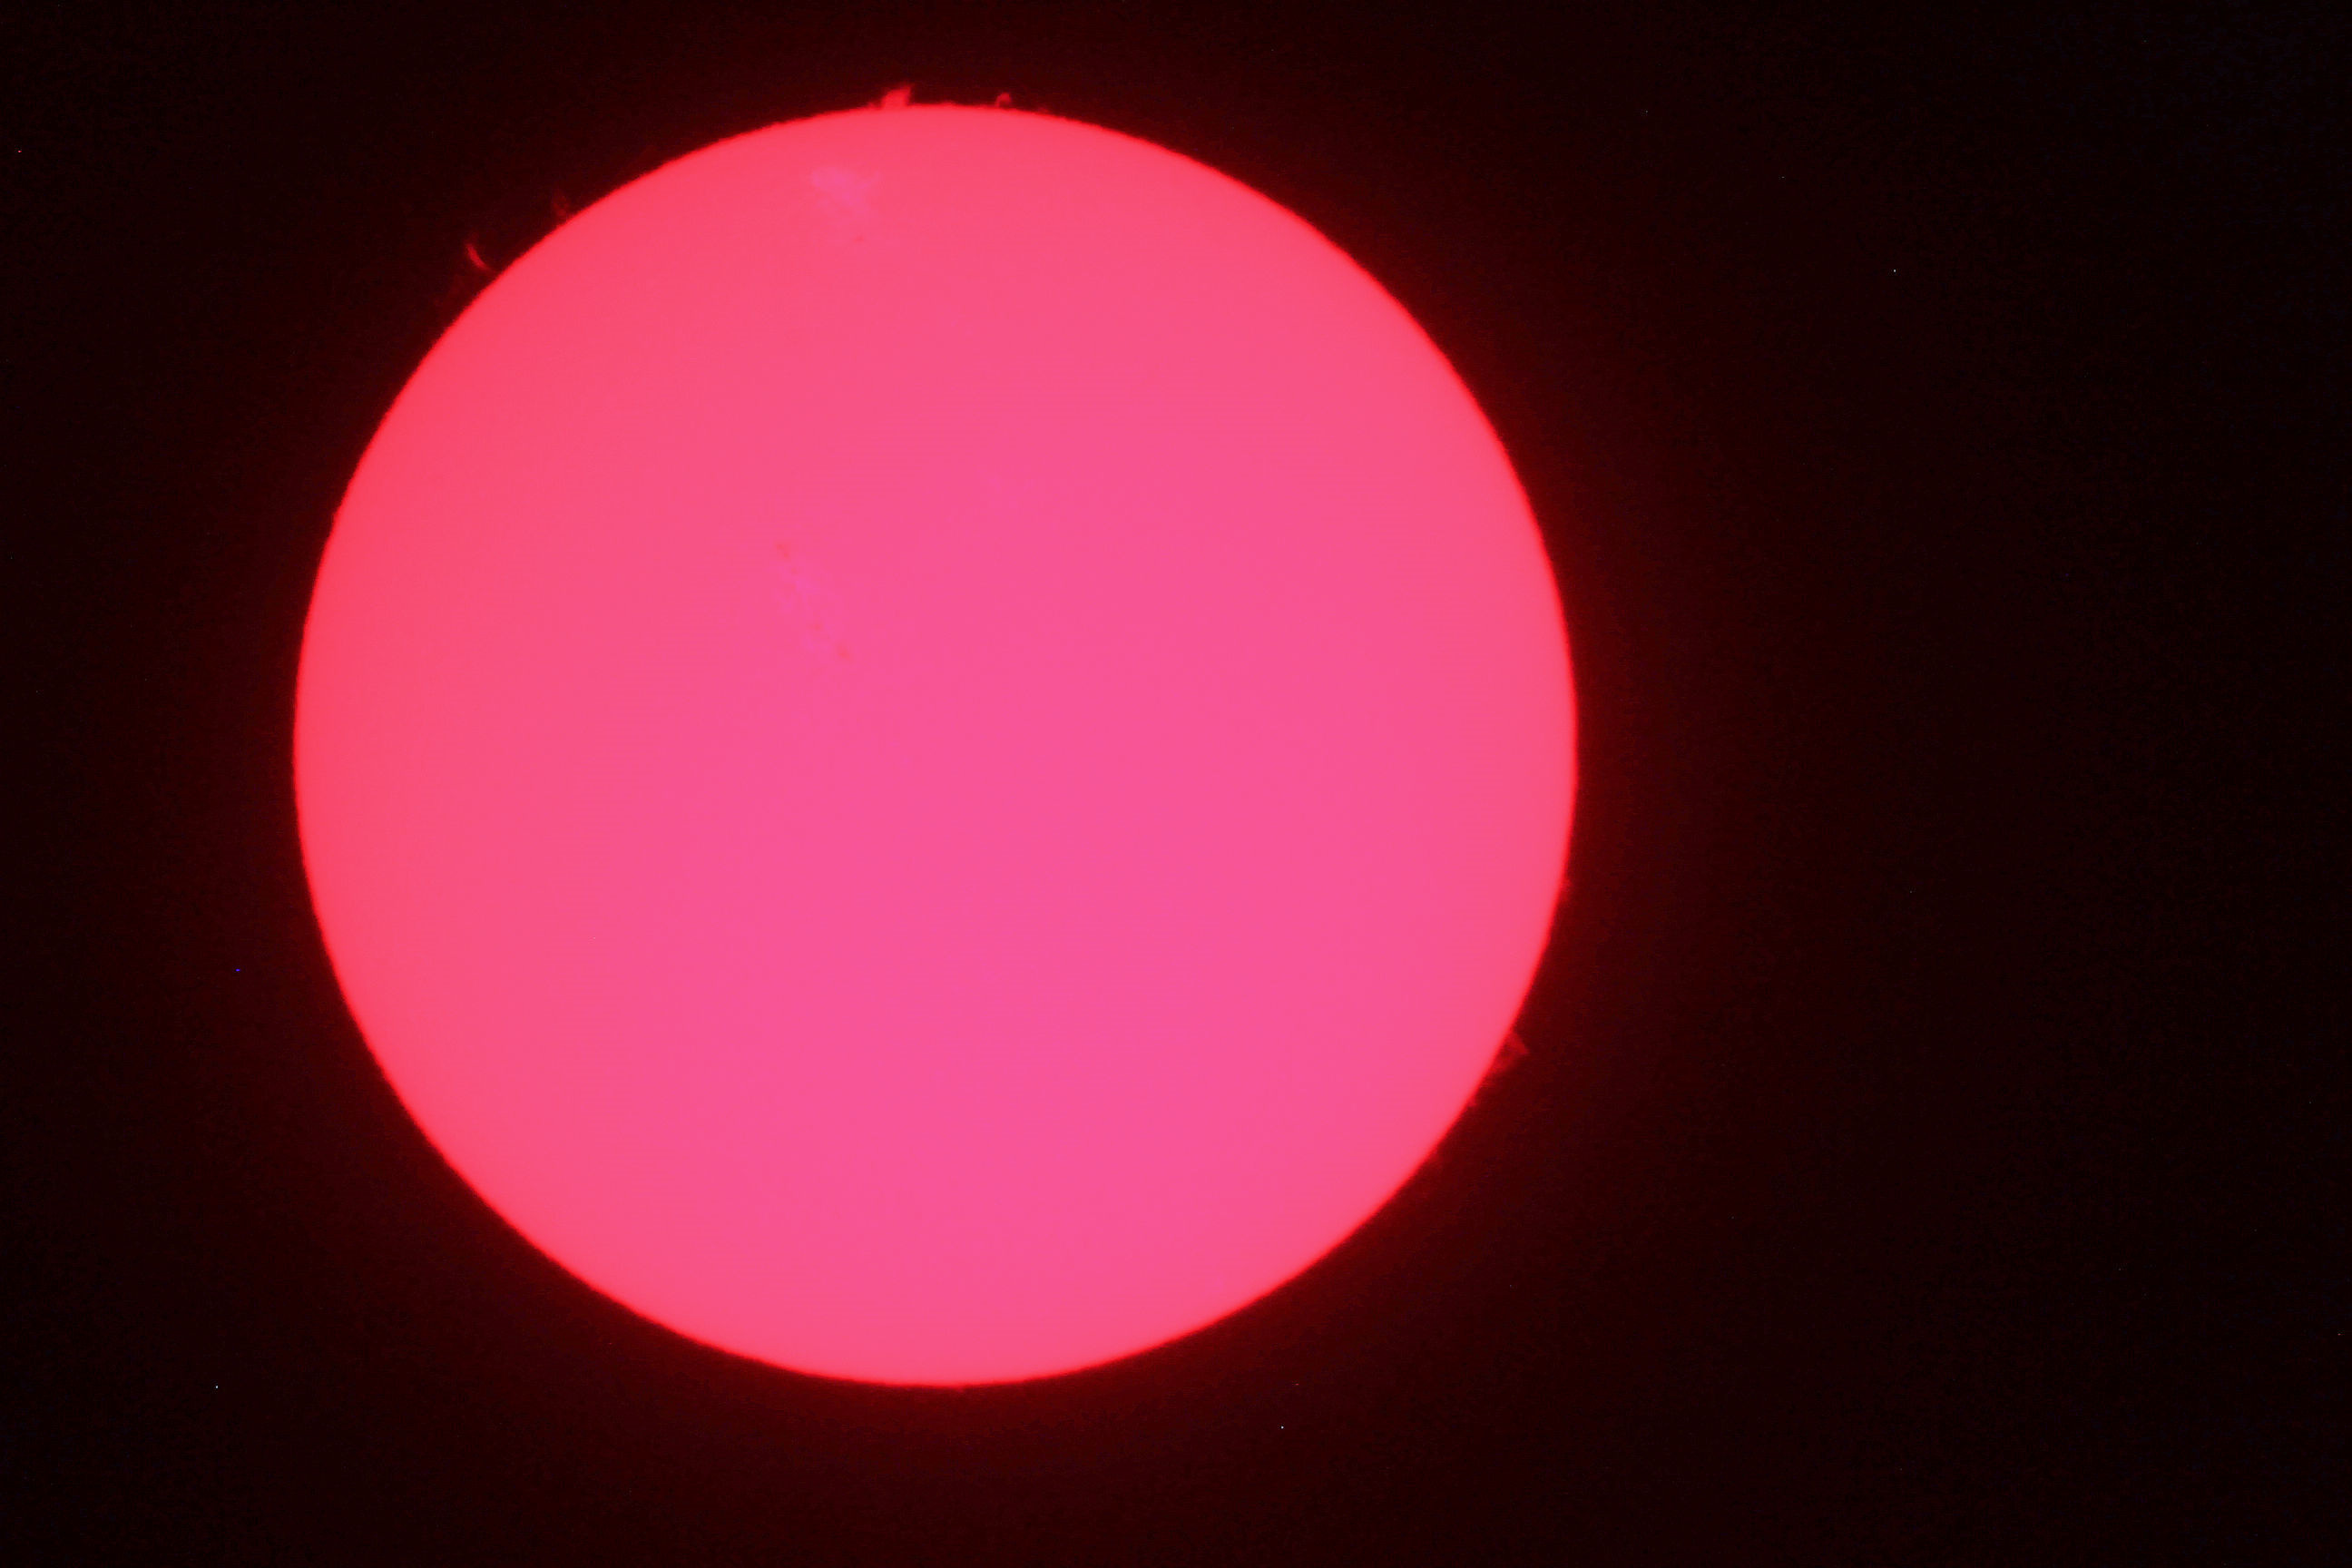 Sun by Jim Barber 24/04/17. Canon EOS 600d 1/60th second  ISO-640, 50mm focal length.  I’m not sure but I believe this was taken with the Society’s solar scope